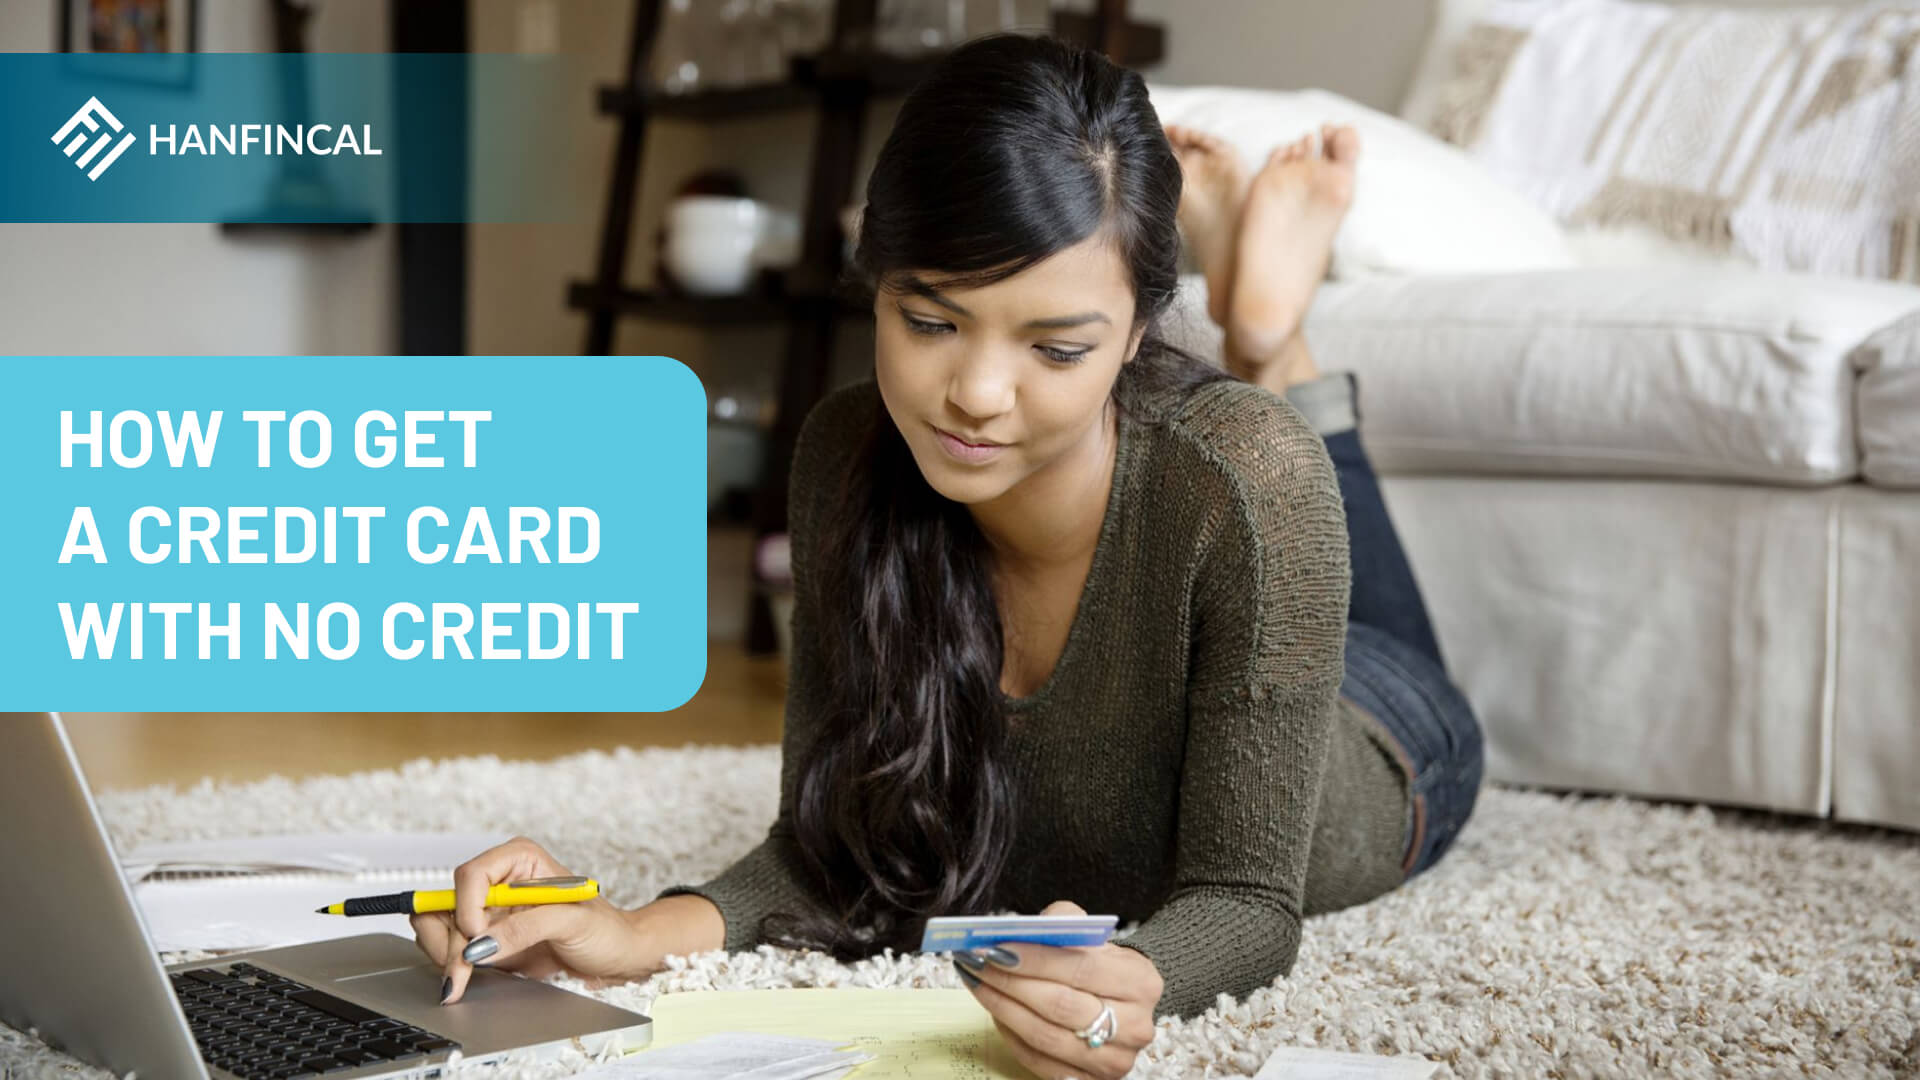 How to get a credit card with no credit?